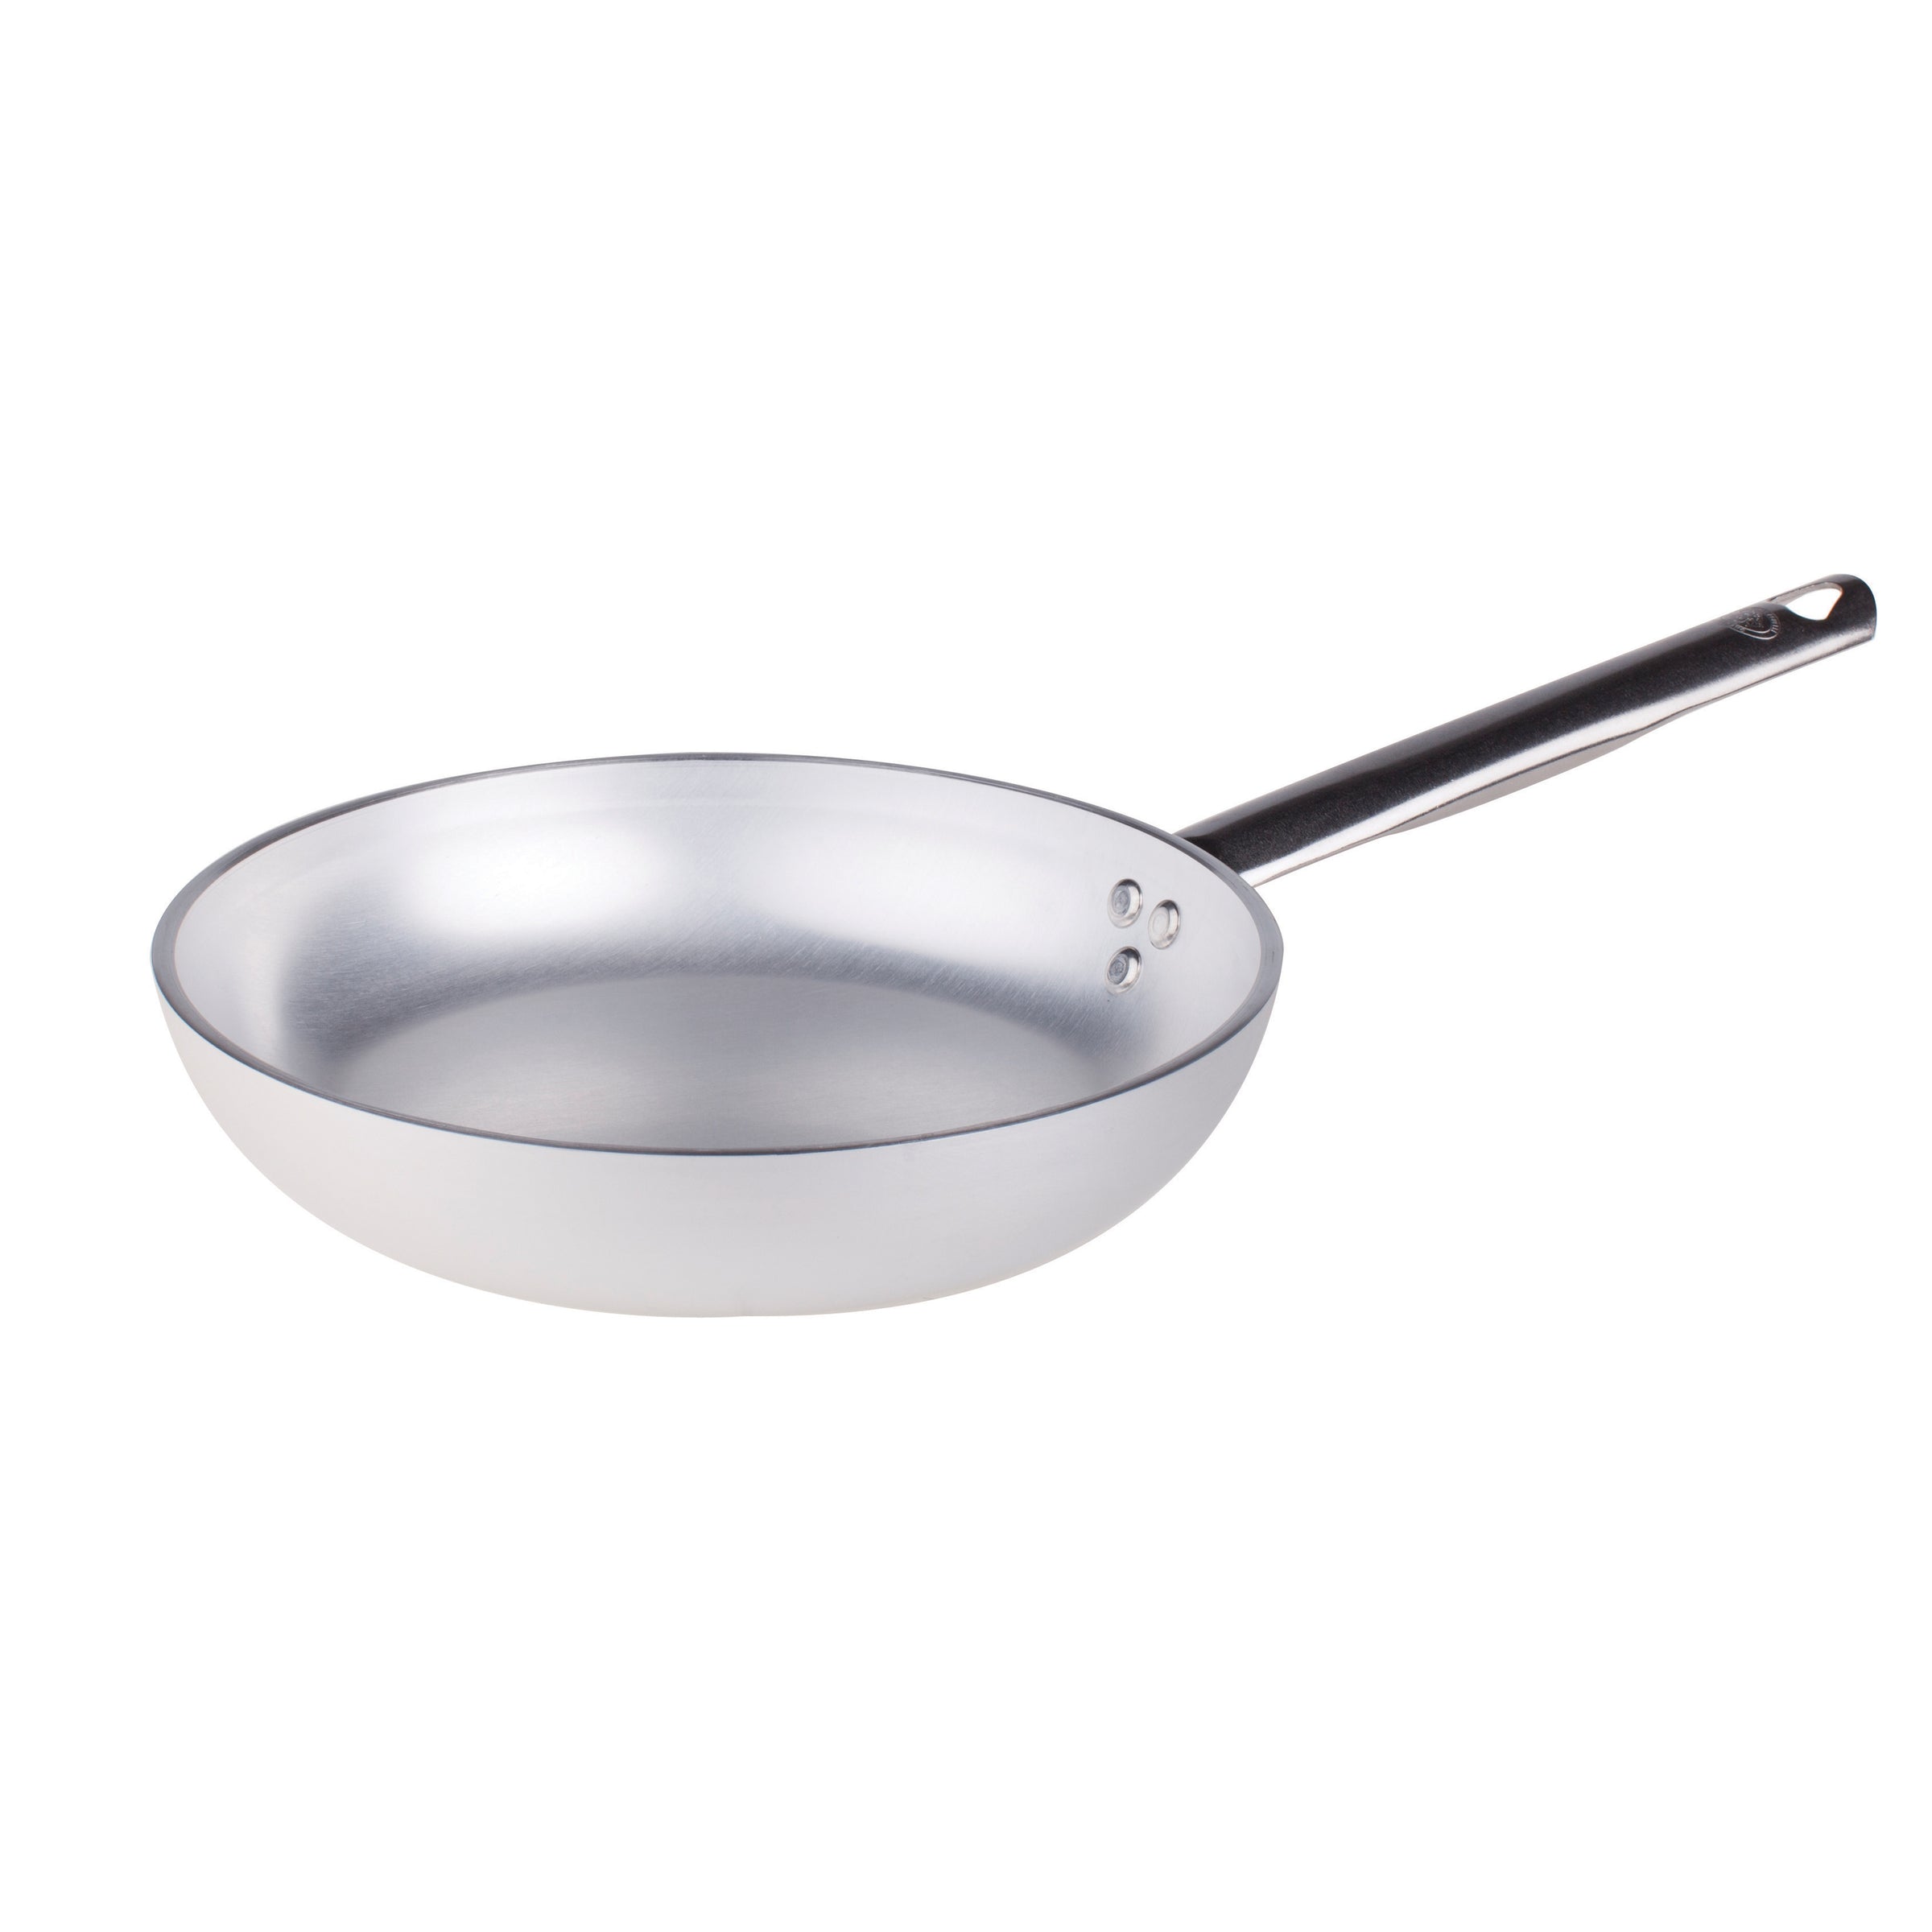 Agnelli Aluminum 3mm Fry Pan with Stainless Steel Handle, 16.5-Inches